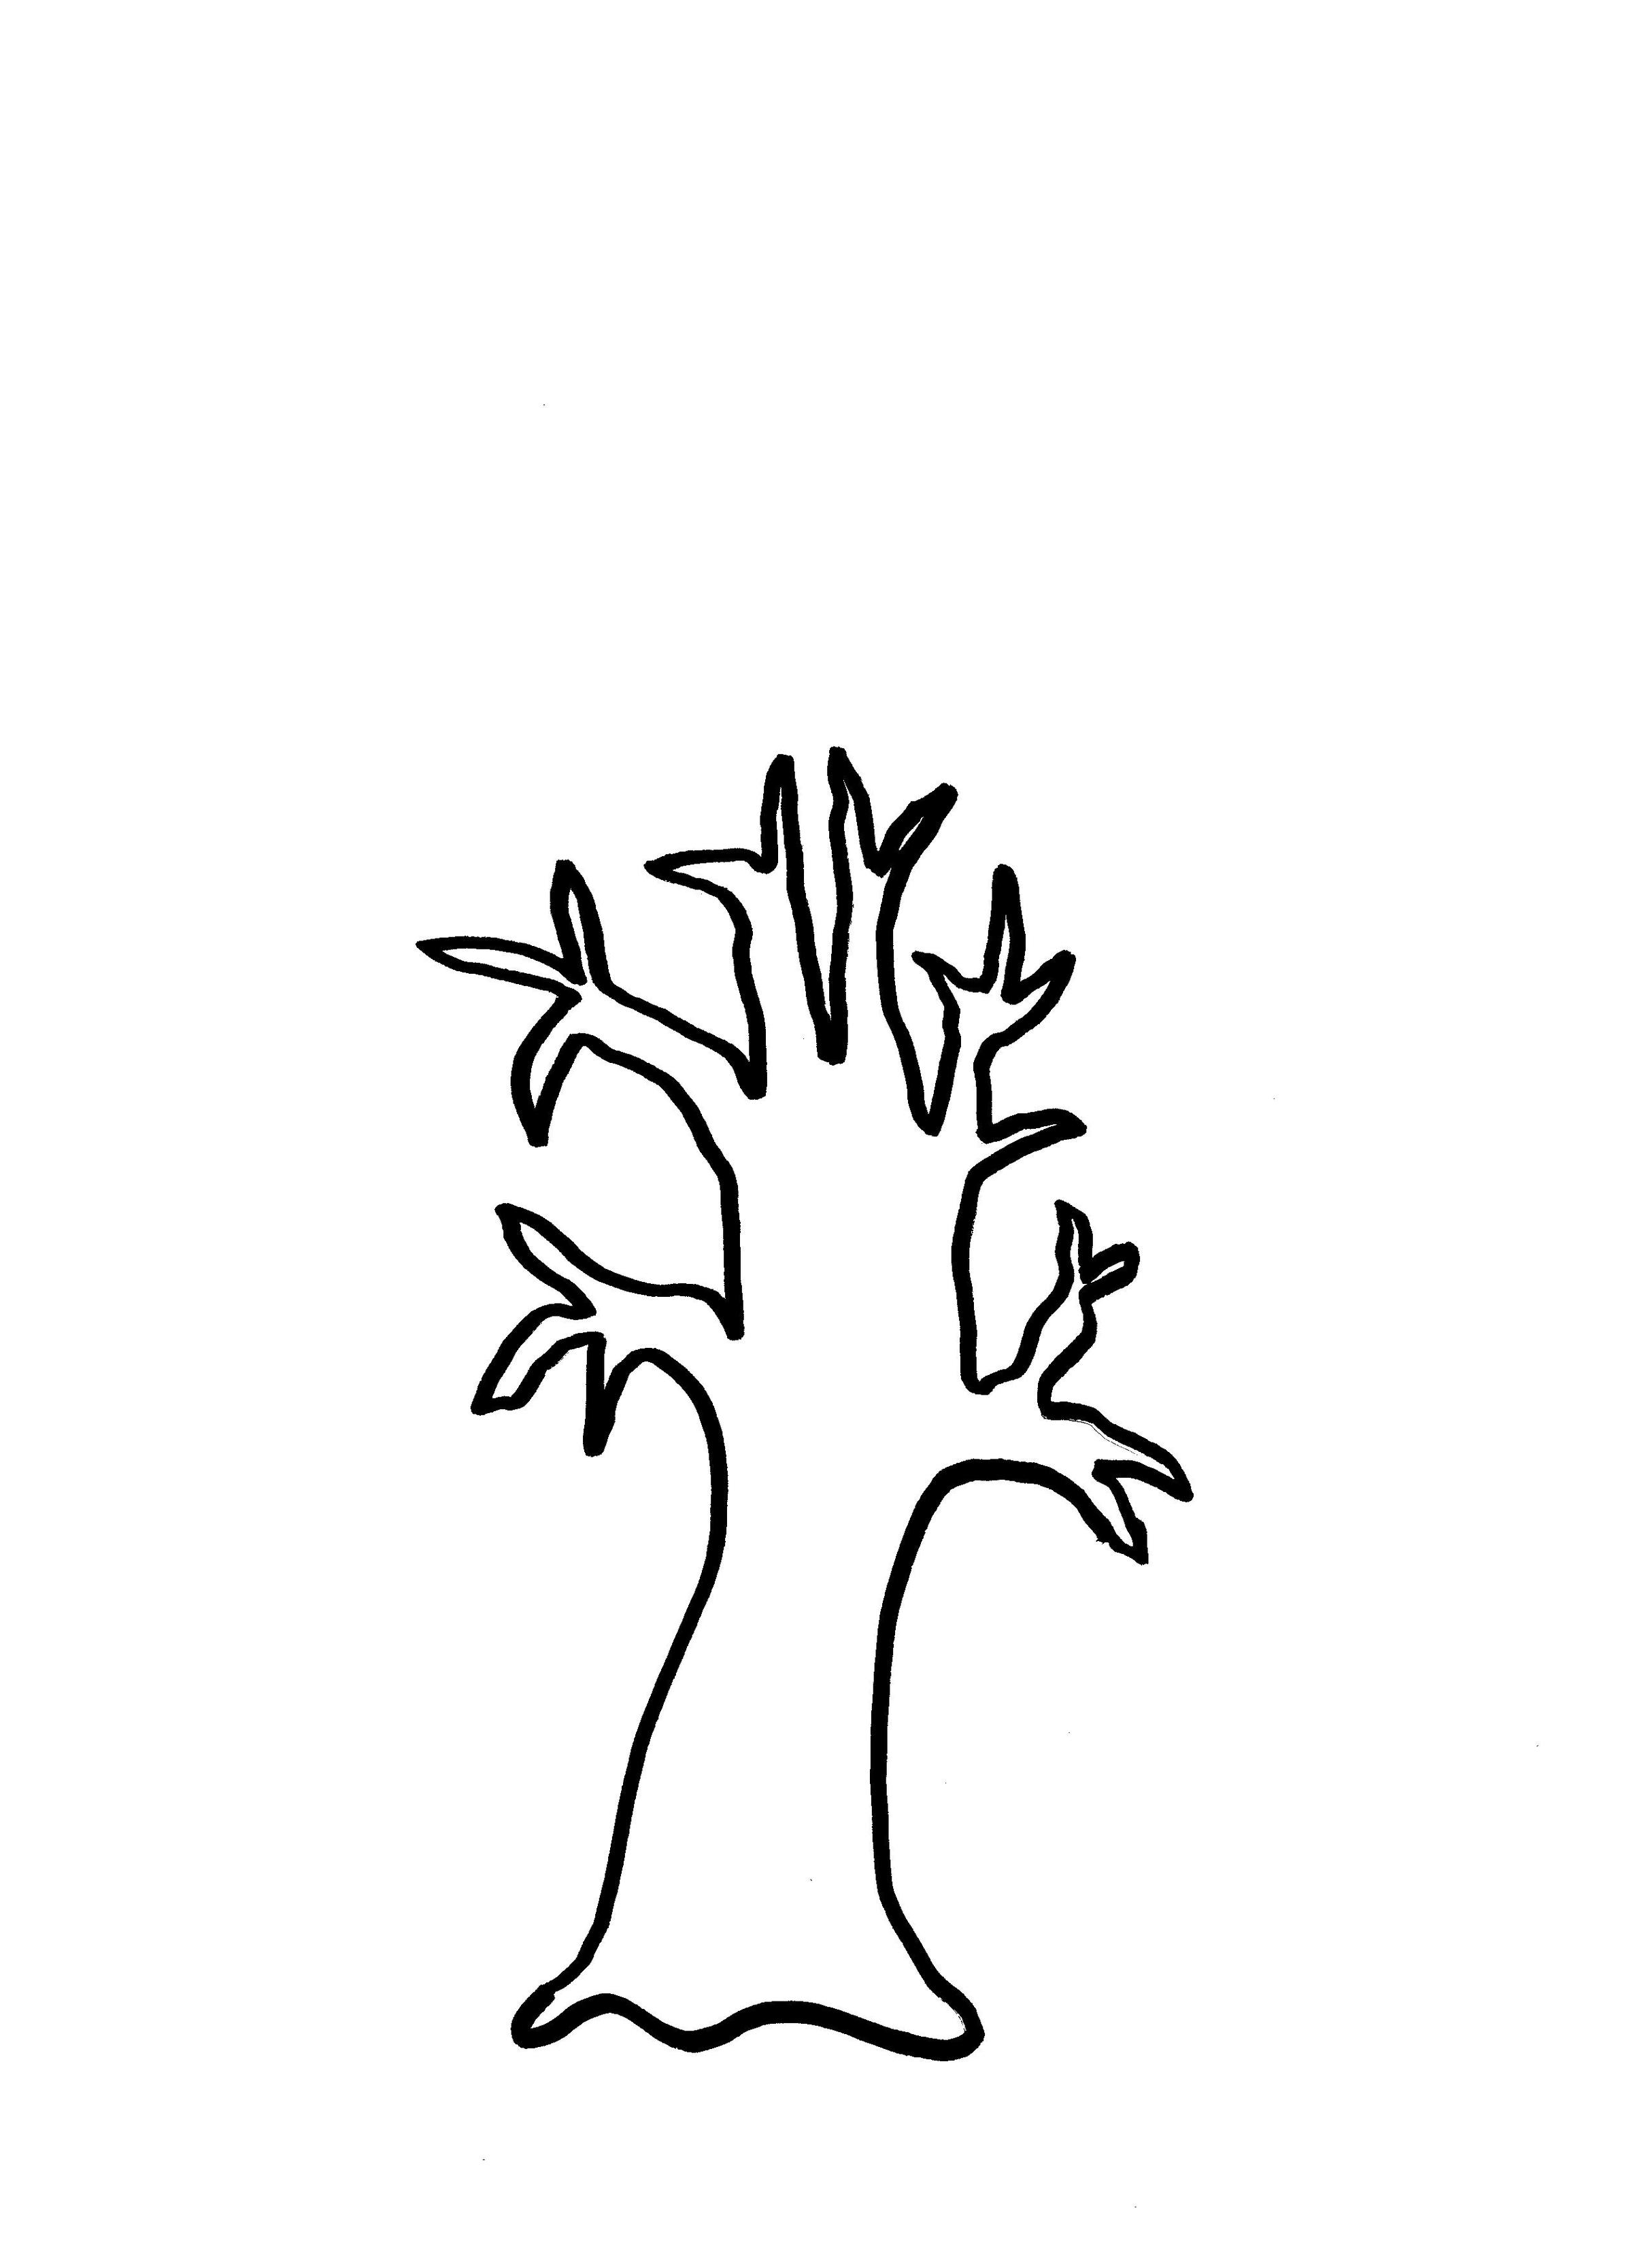 Tree Trunkcoloring Page - AZ Coloring Pages